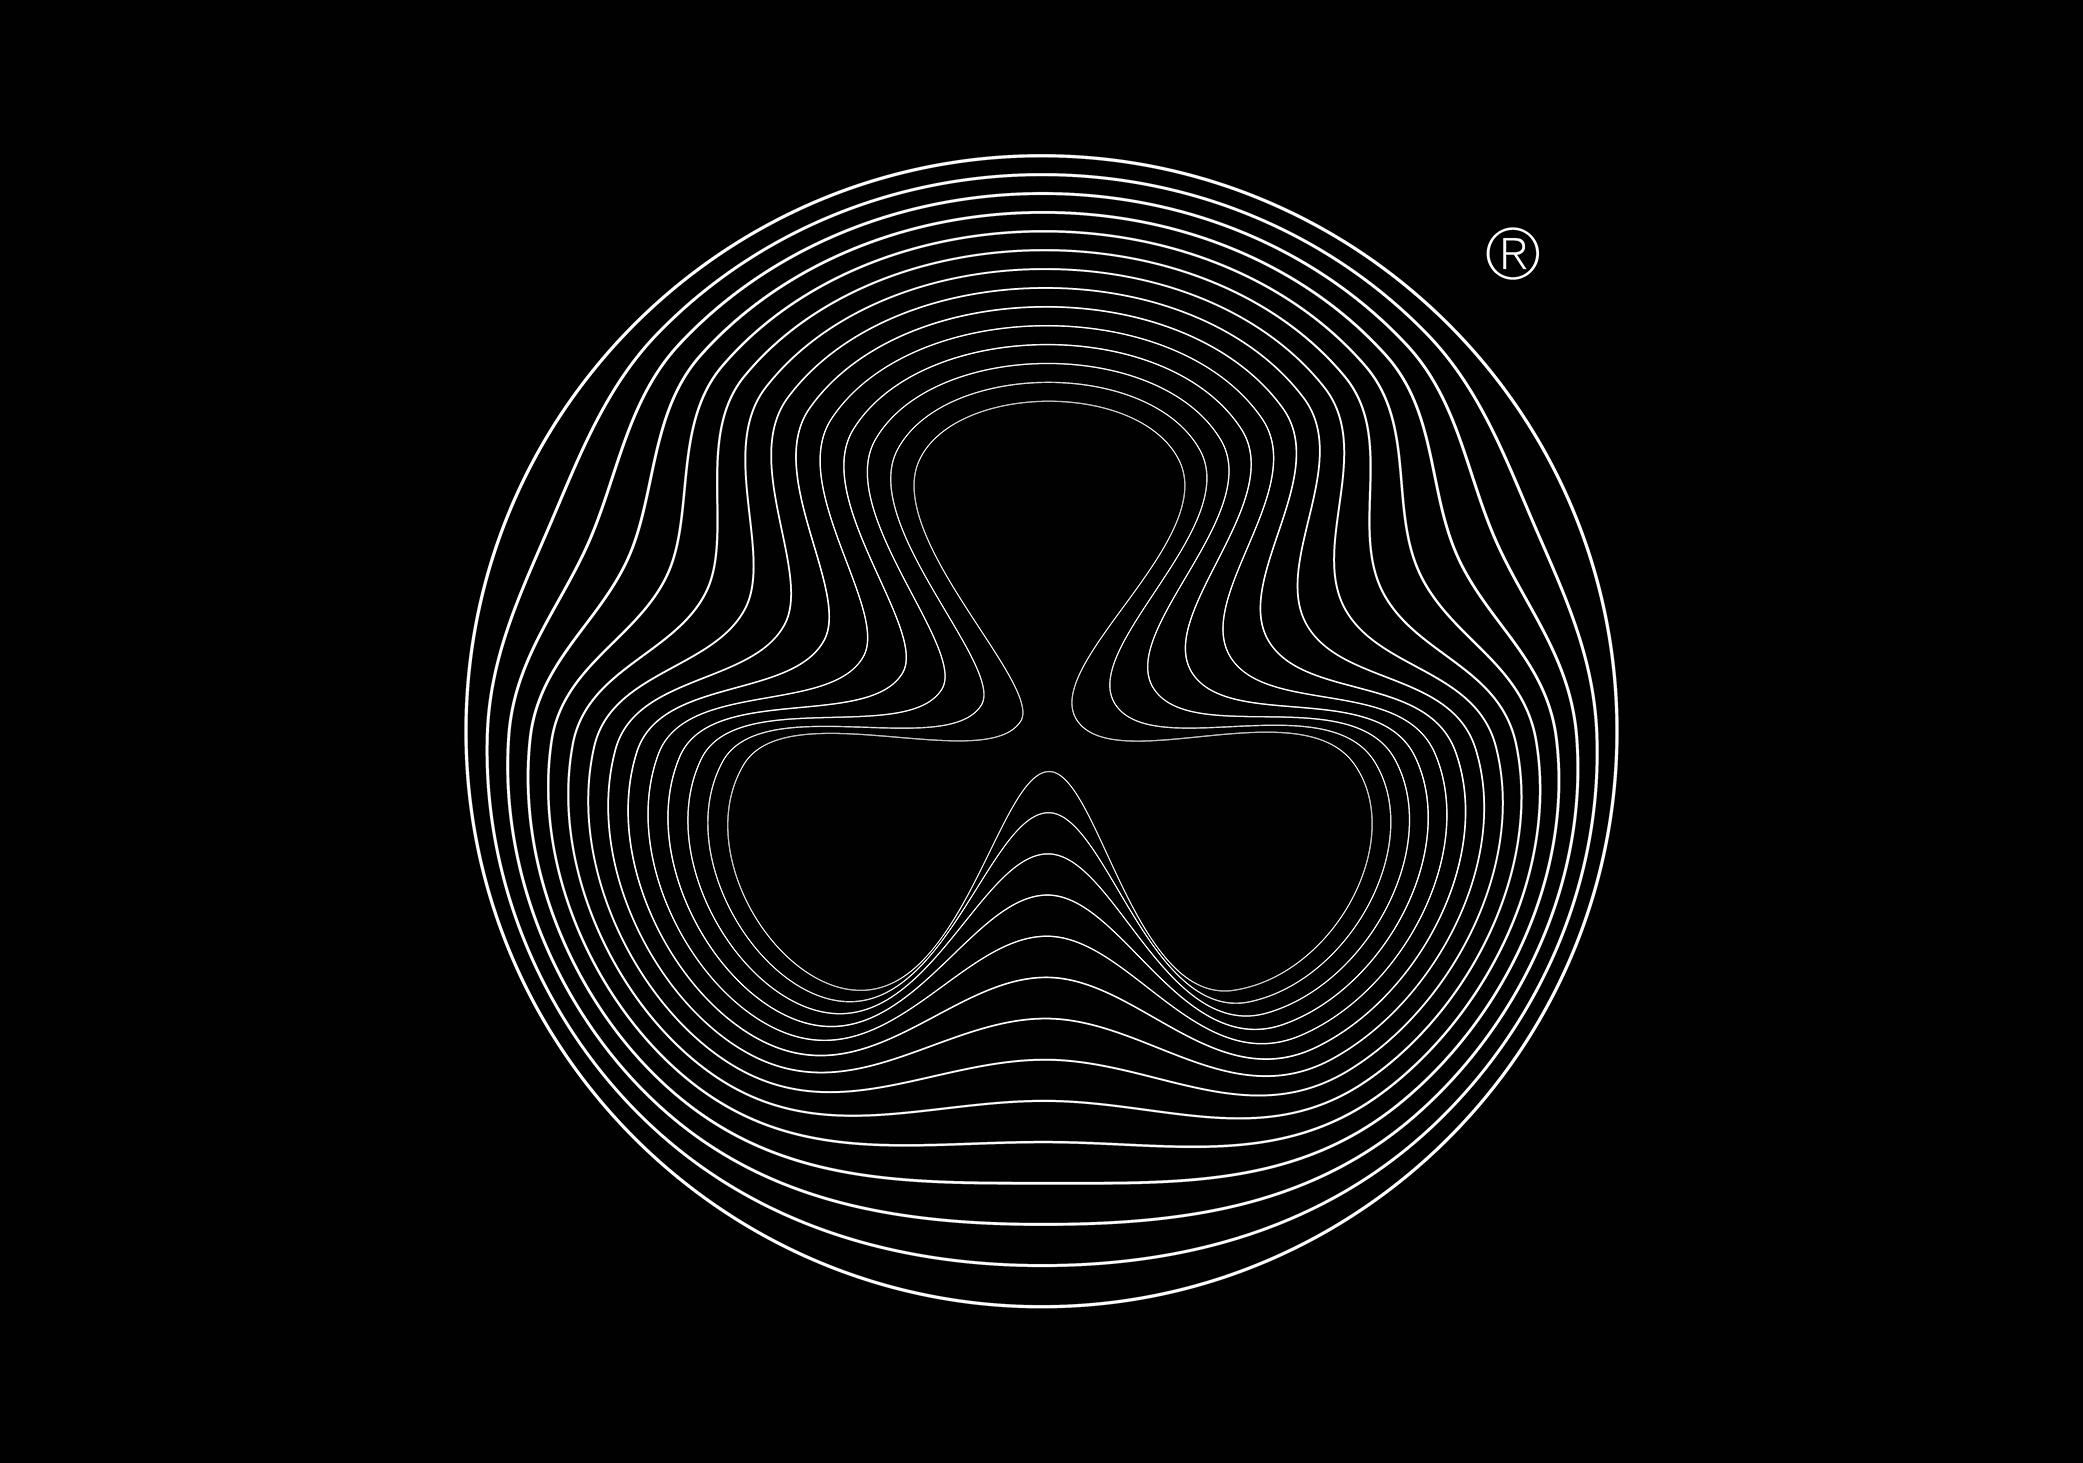 Minimalistic logo design made up of warped thinly lined circles